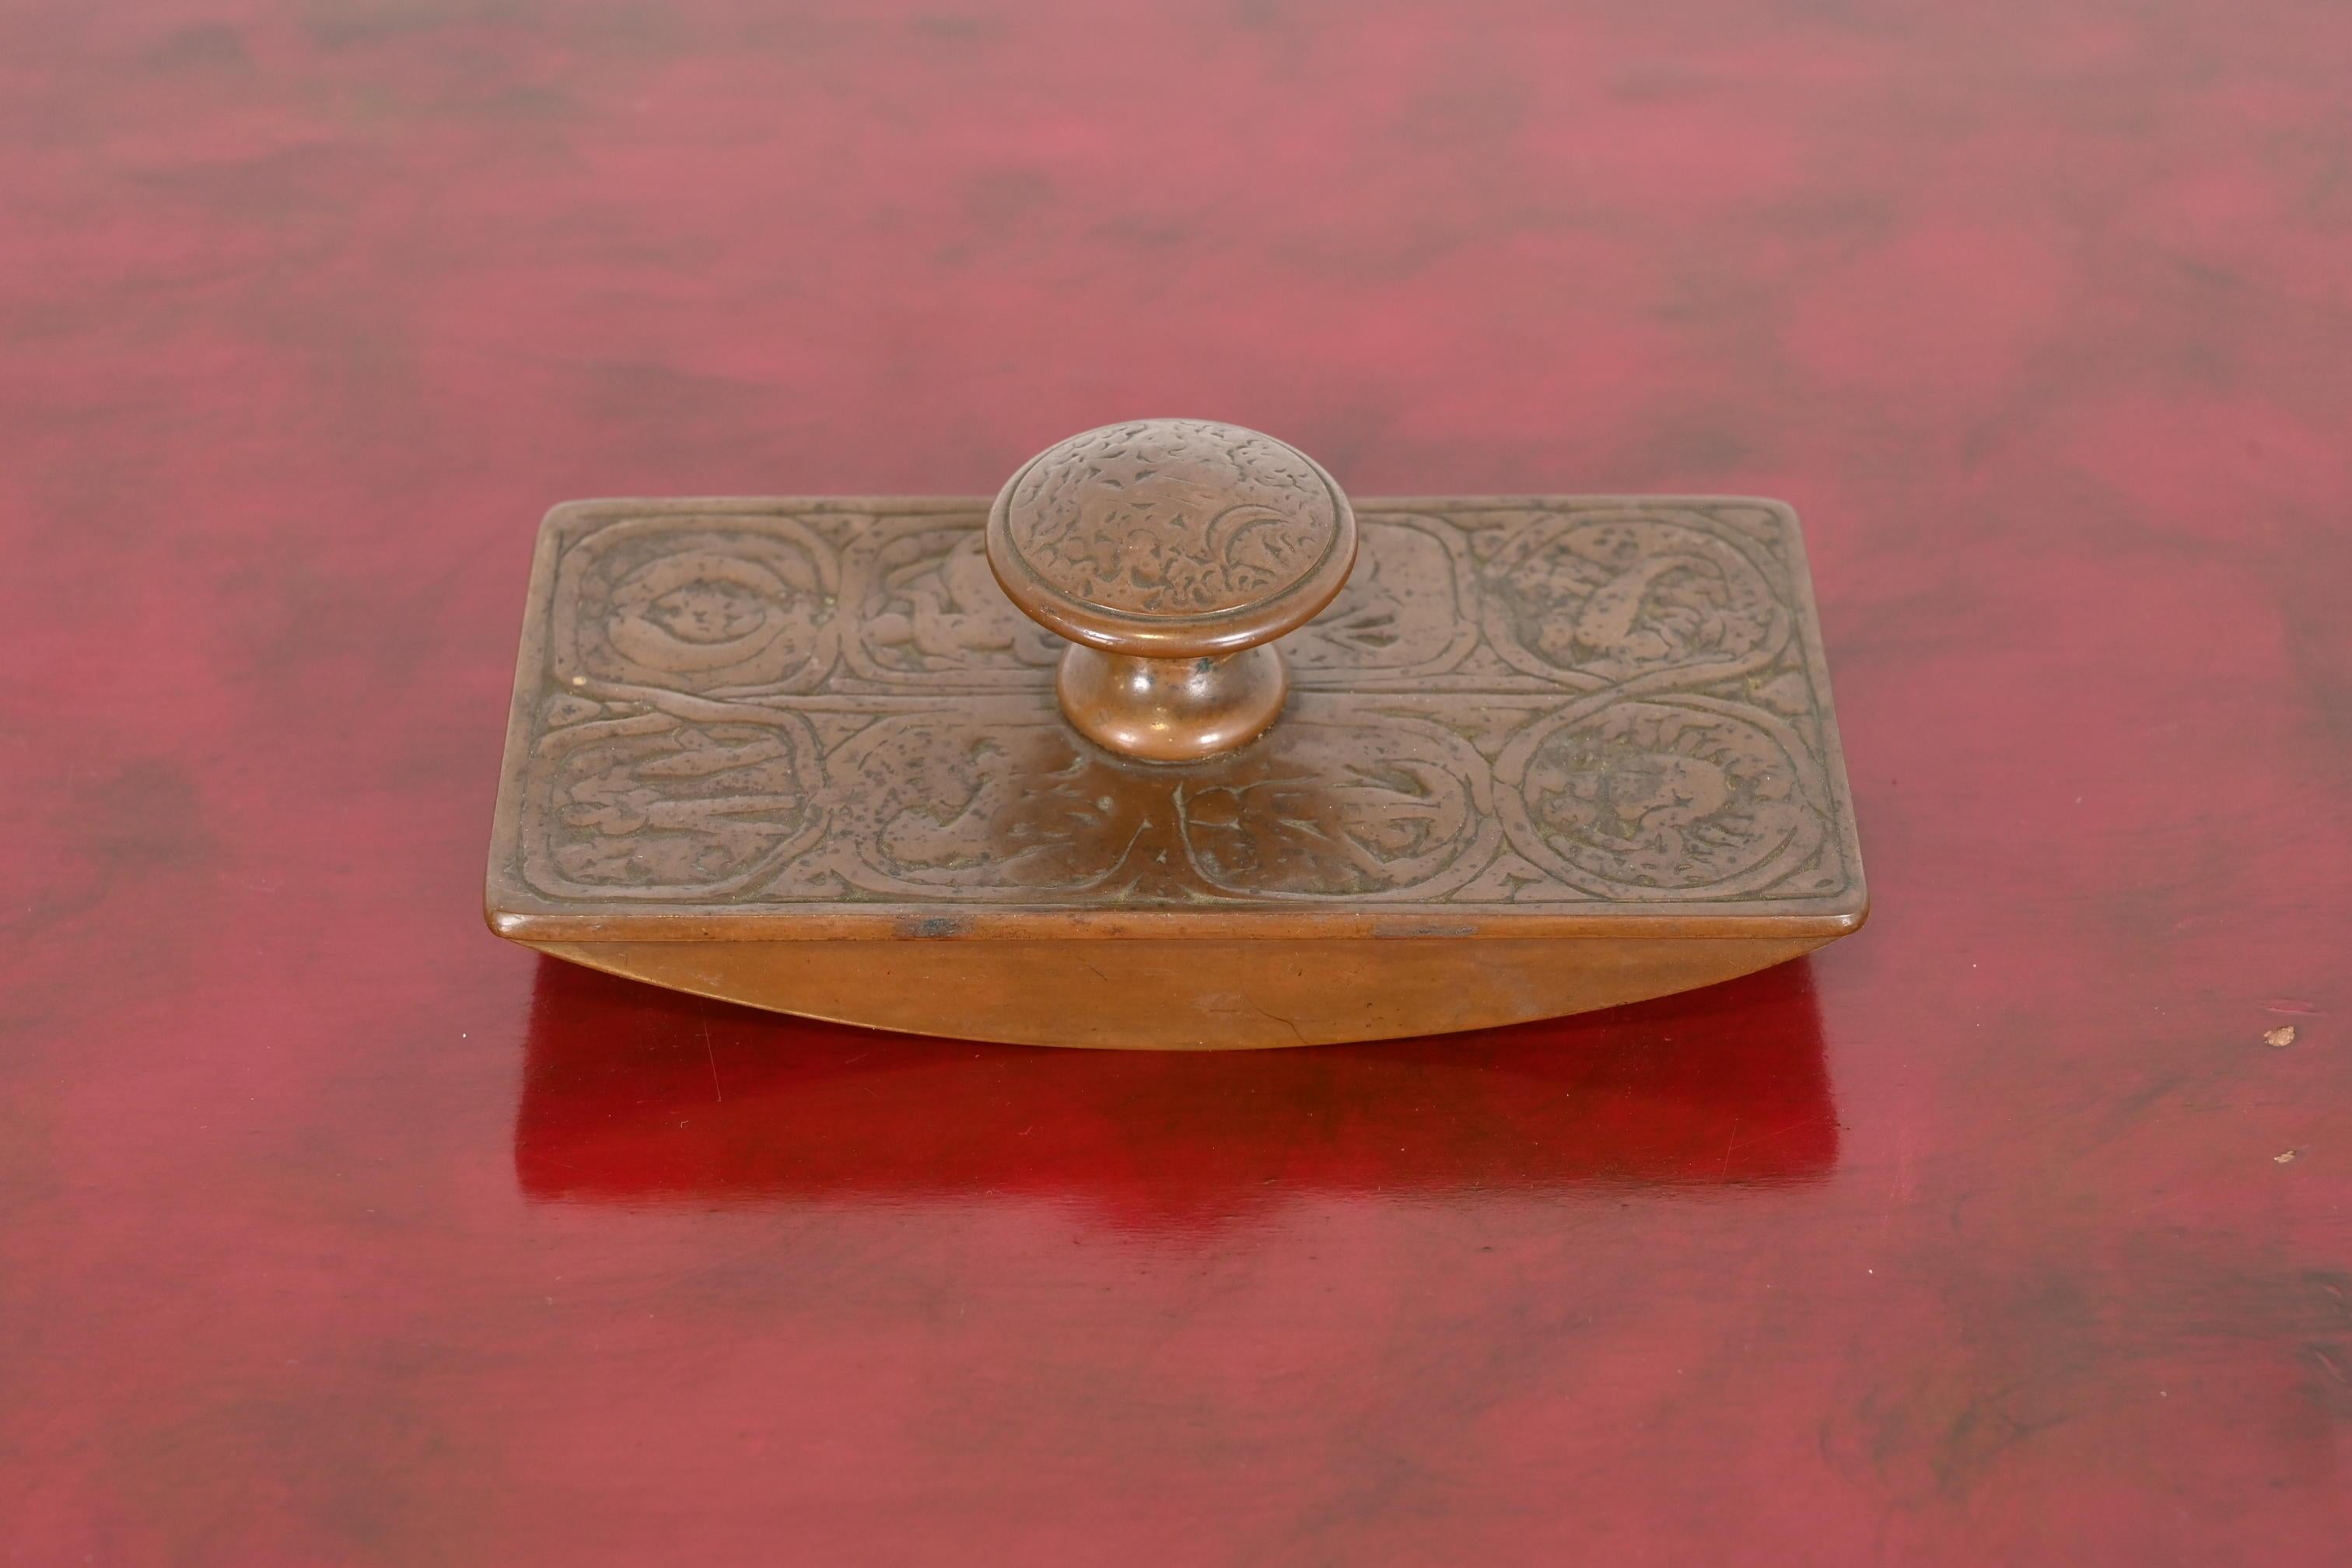 A gorgeous antique bronze rocker ink blotter featuring Zodiac designs

By Tiffany Studios (signed on the side)

New York, USA, Early 20th Century

Measures: 5.75